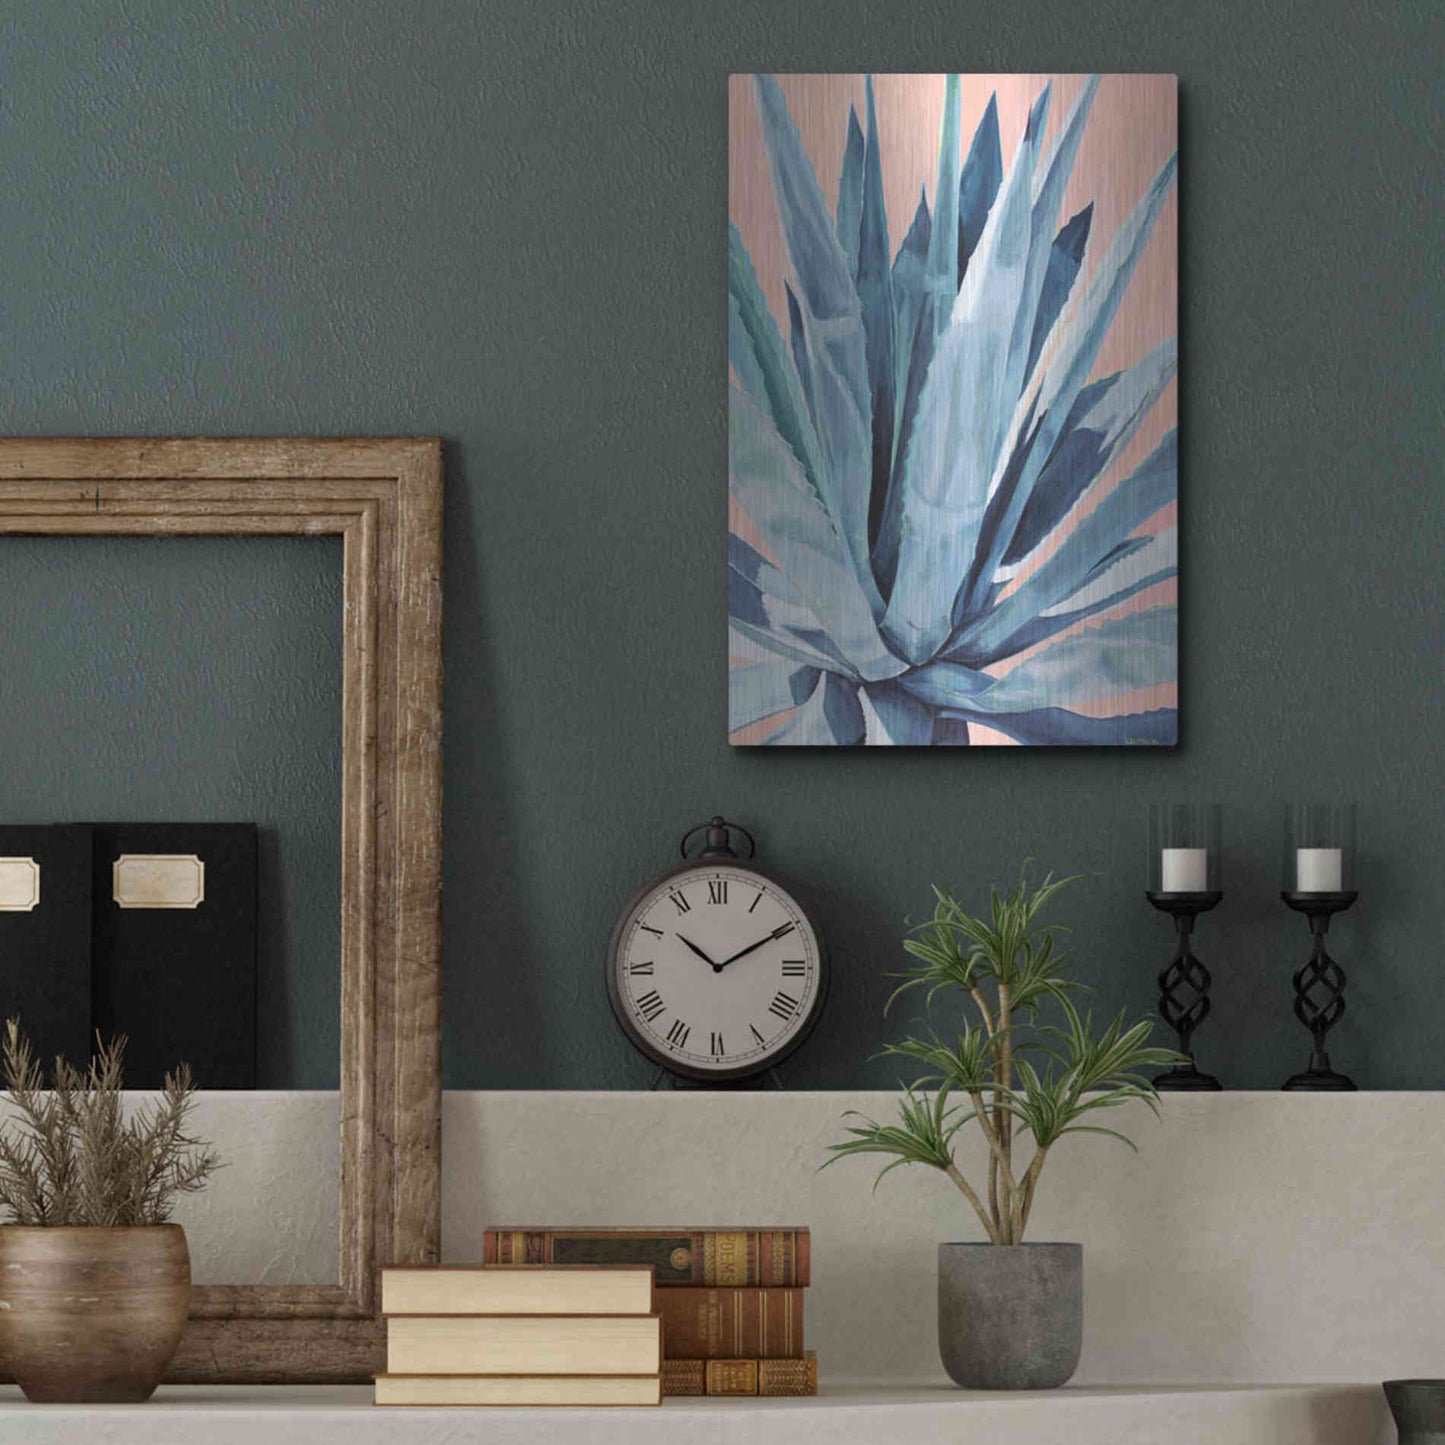 Luxe Metal Art 'Agave With Coral by Alana Clumeck Metal Wall Art,12x16